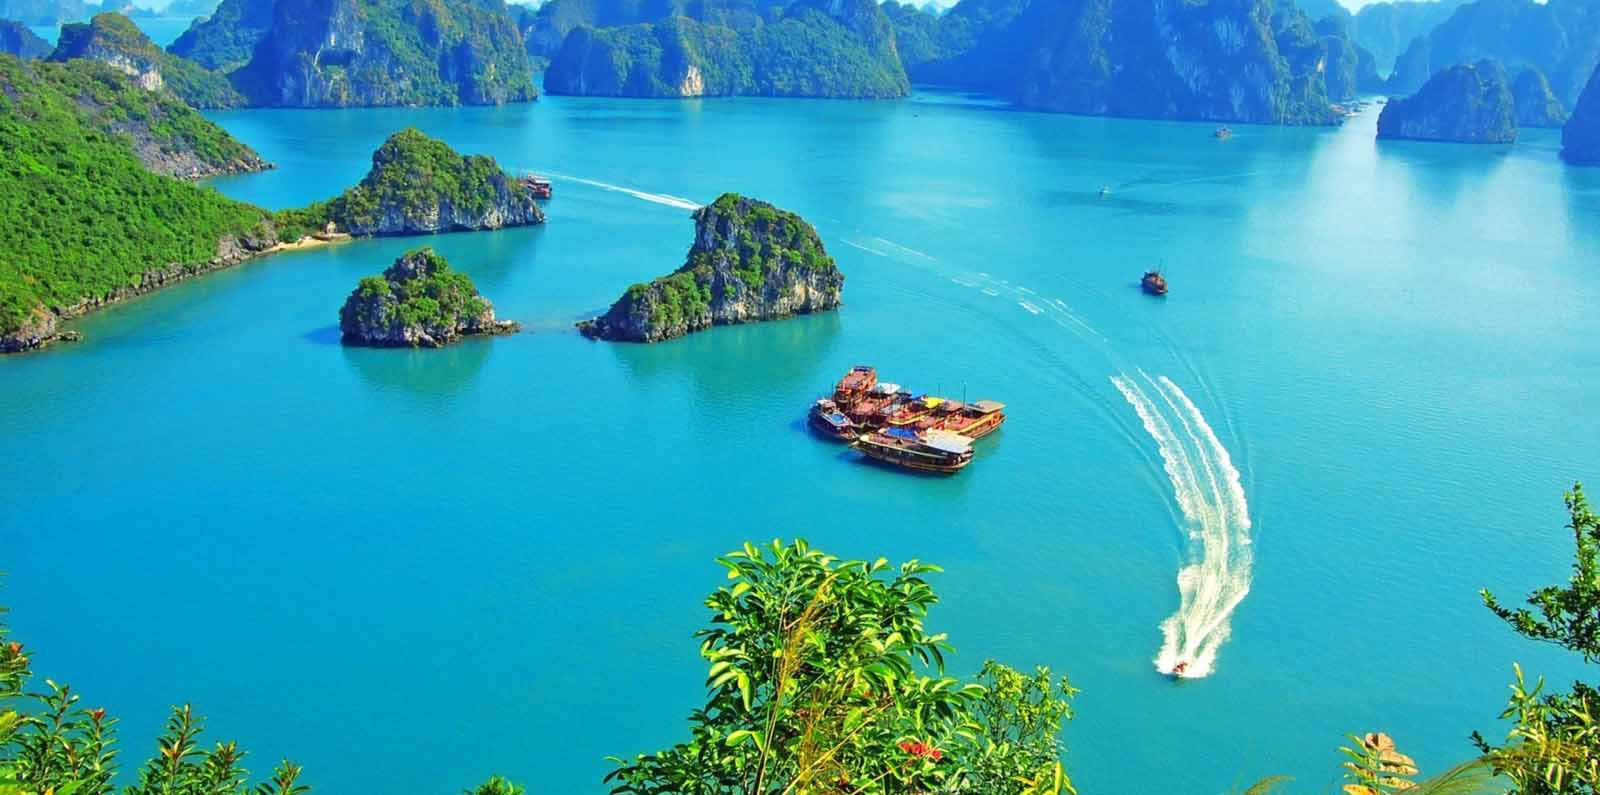 6 interesting facts you may not know about Ha Long Bay